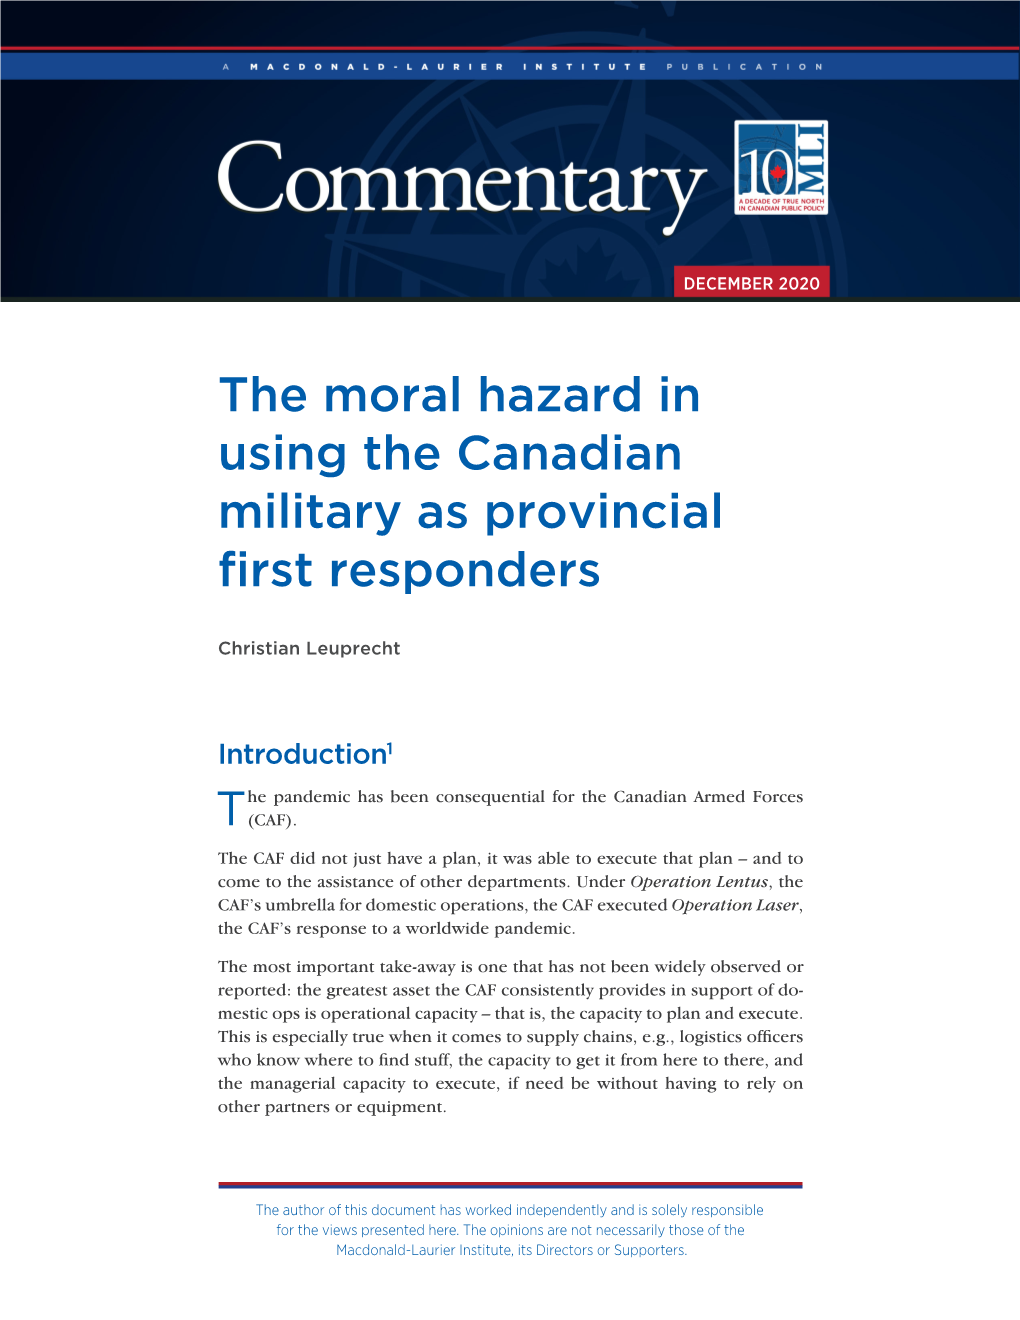 The Moral Hazard in Using the Canadian Military As Provincial First Responders